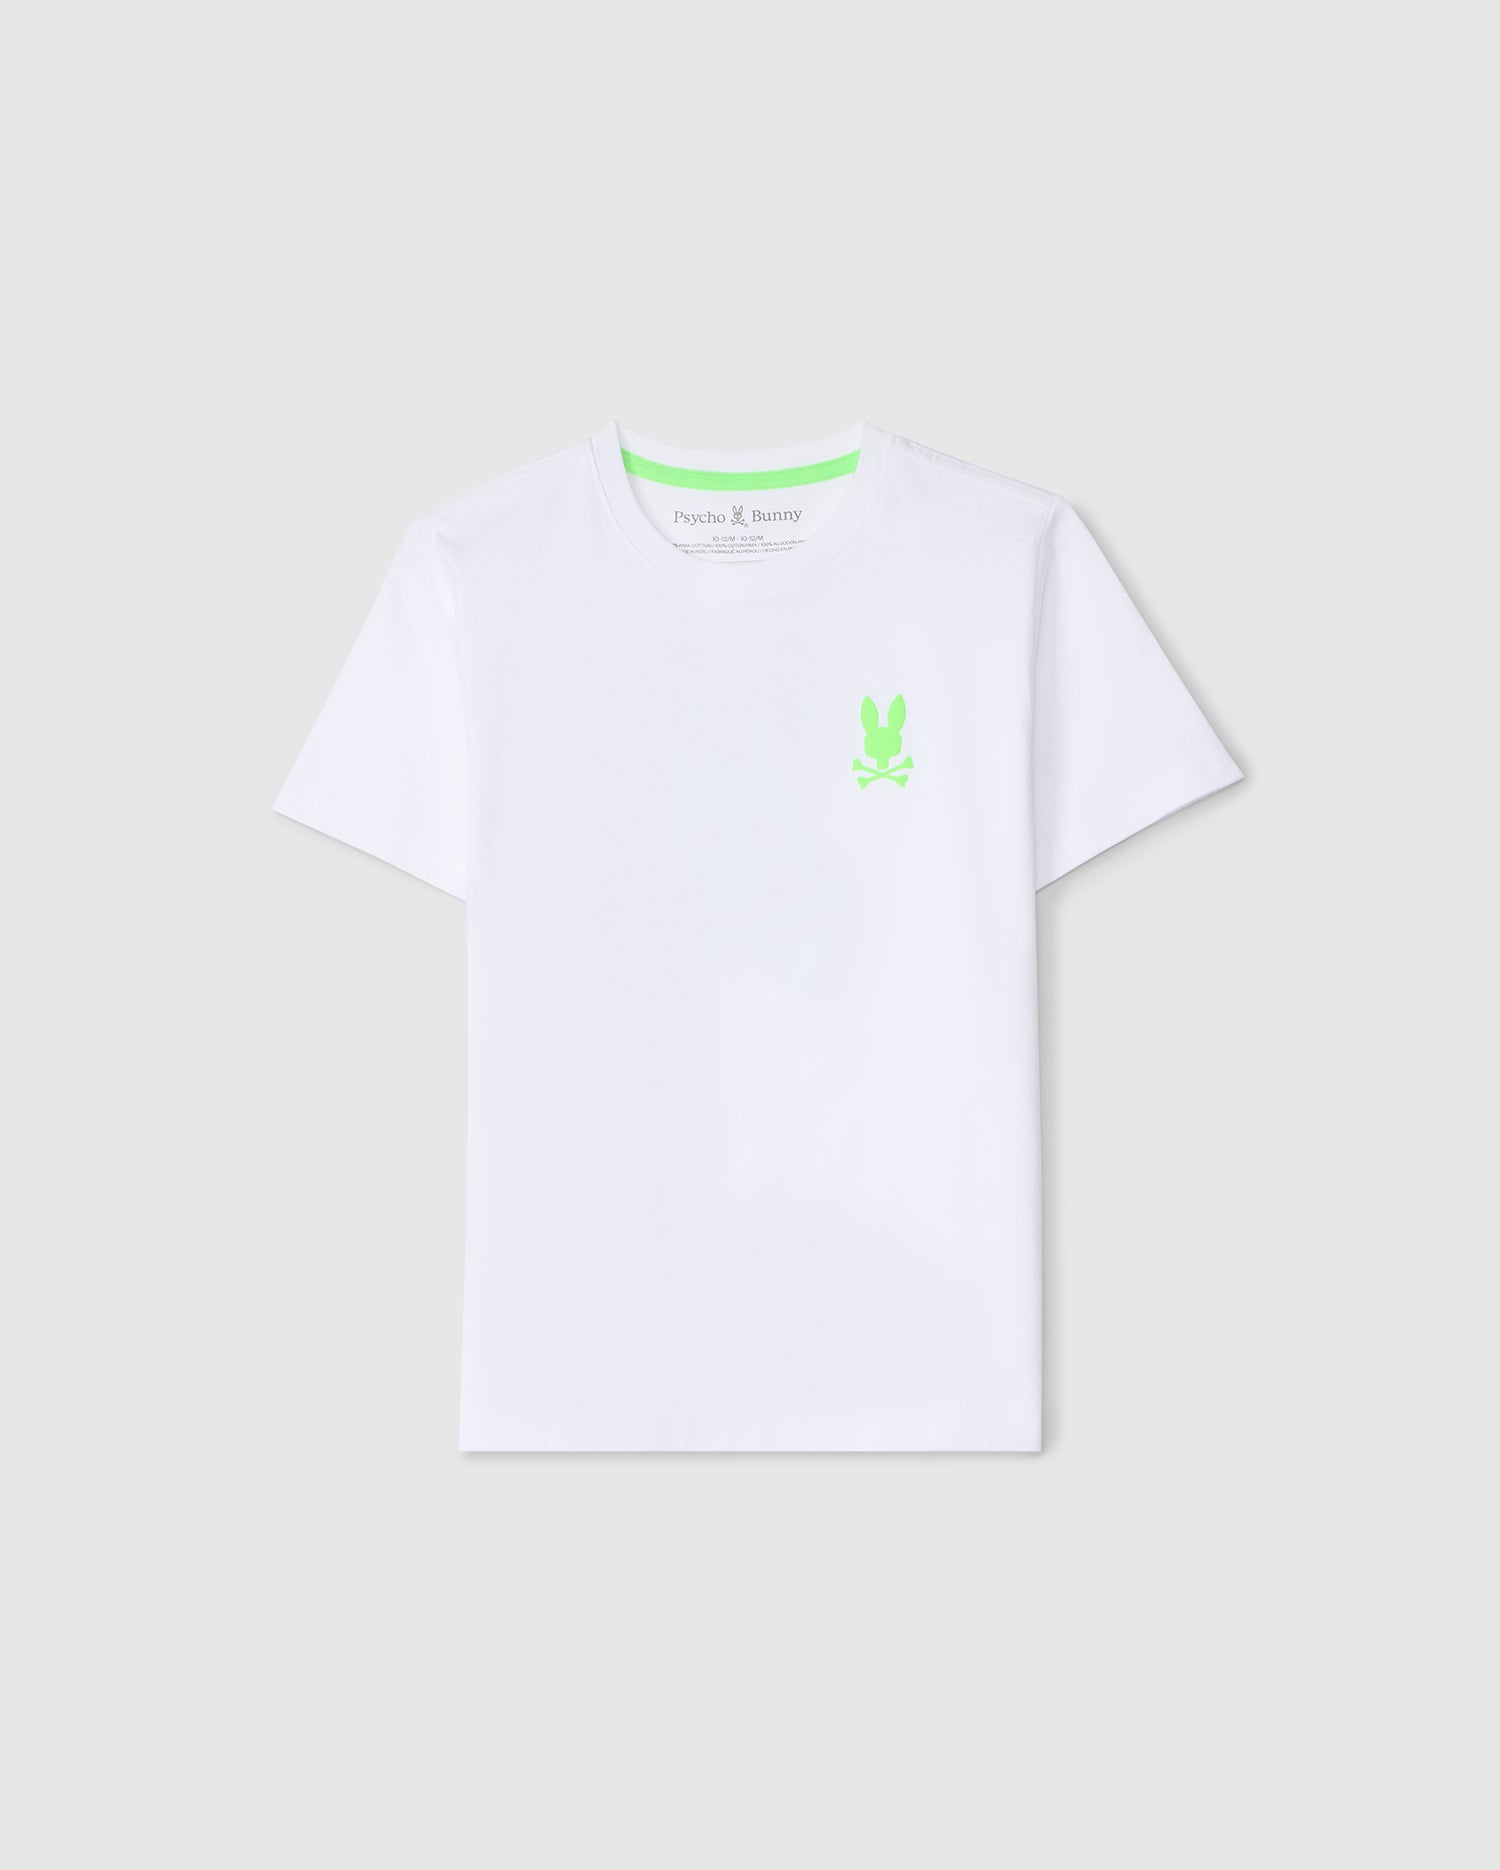 Plain white Pima cotton KIDS SLOAN BACK GRAPHIC TEE - B0U214B2TS from Psycho Bunny with a small green bunny logo on the left side of the chest, displayed on a neutral background.